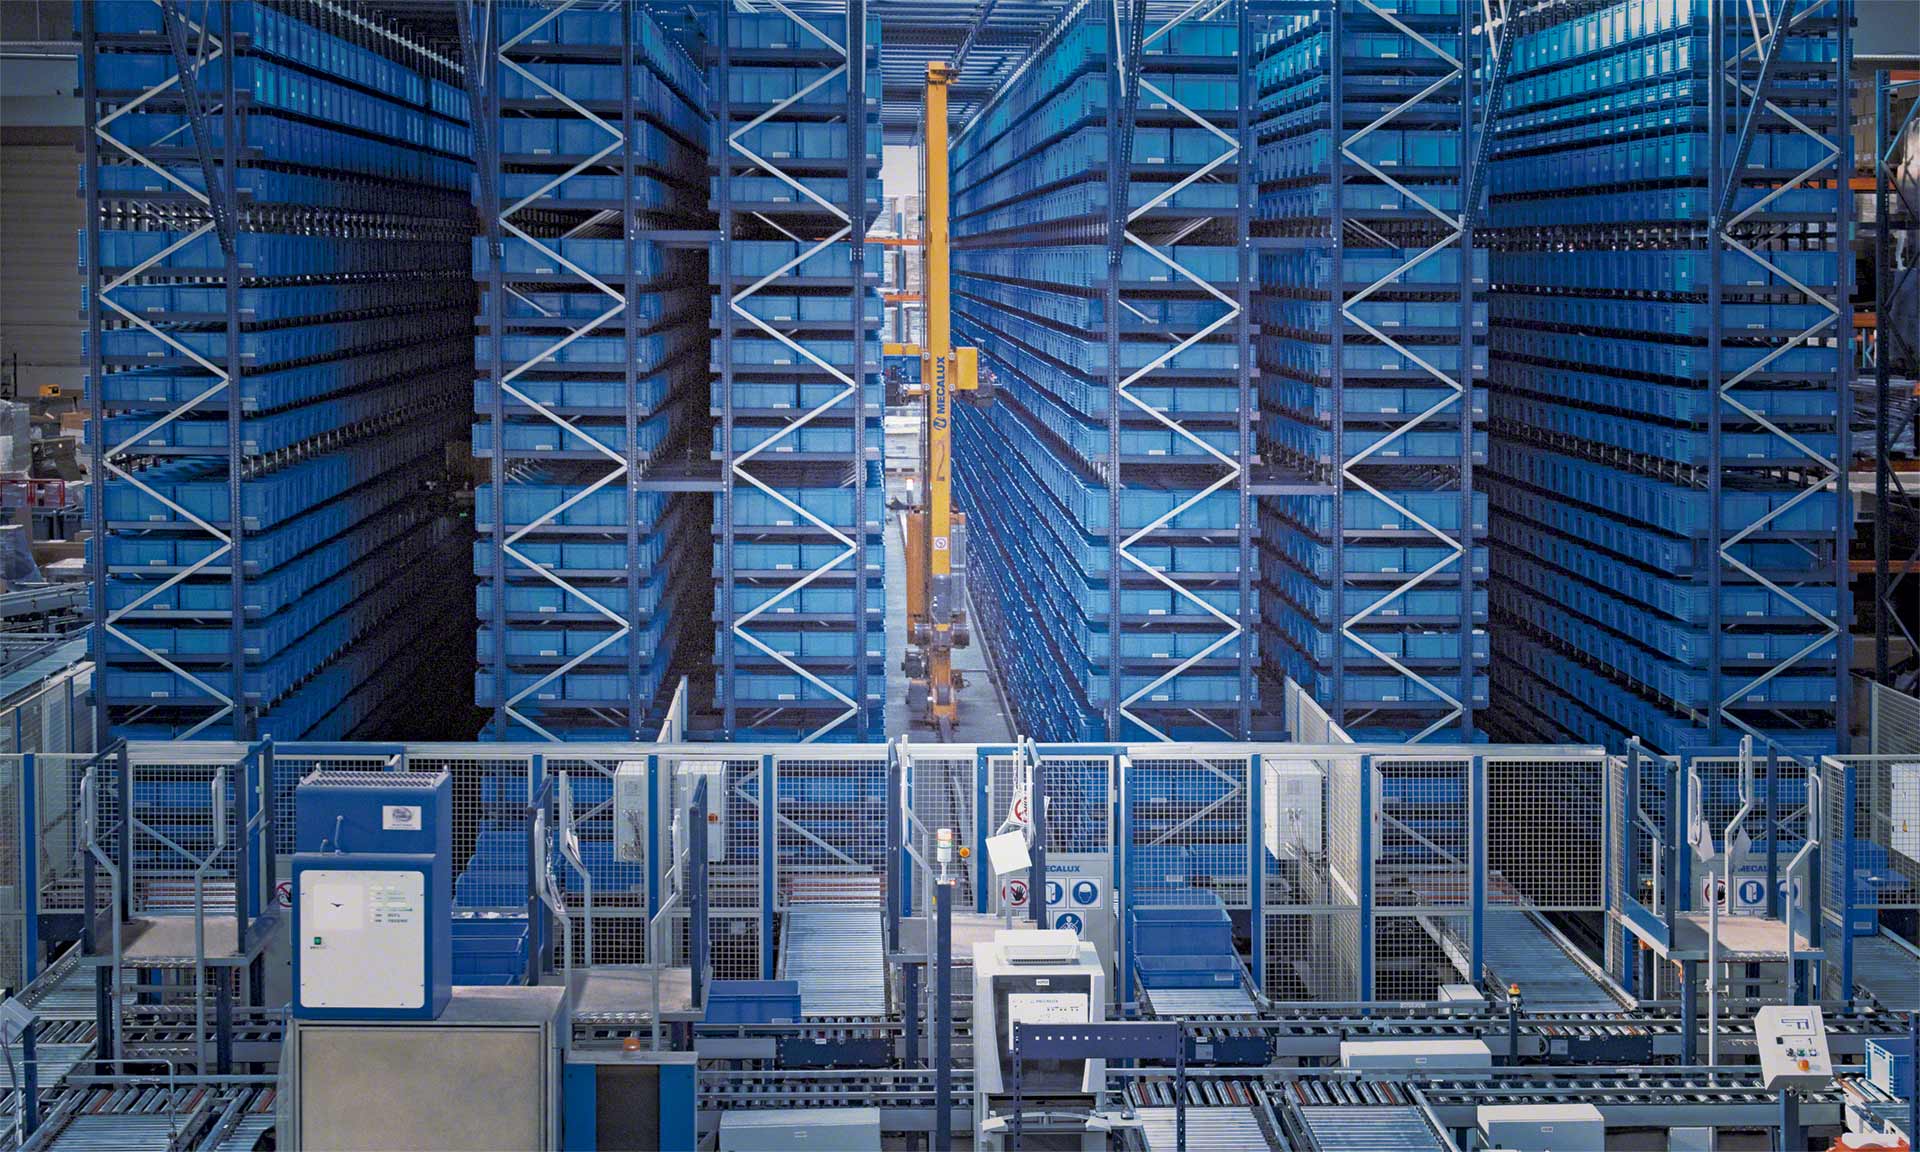 Retail warehouse automation reduces the time it takes to carry out the different logistics operations